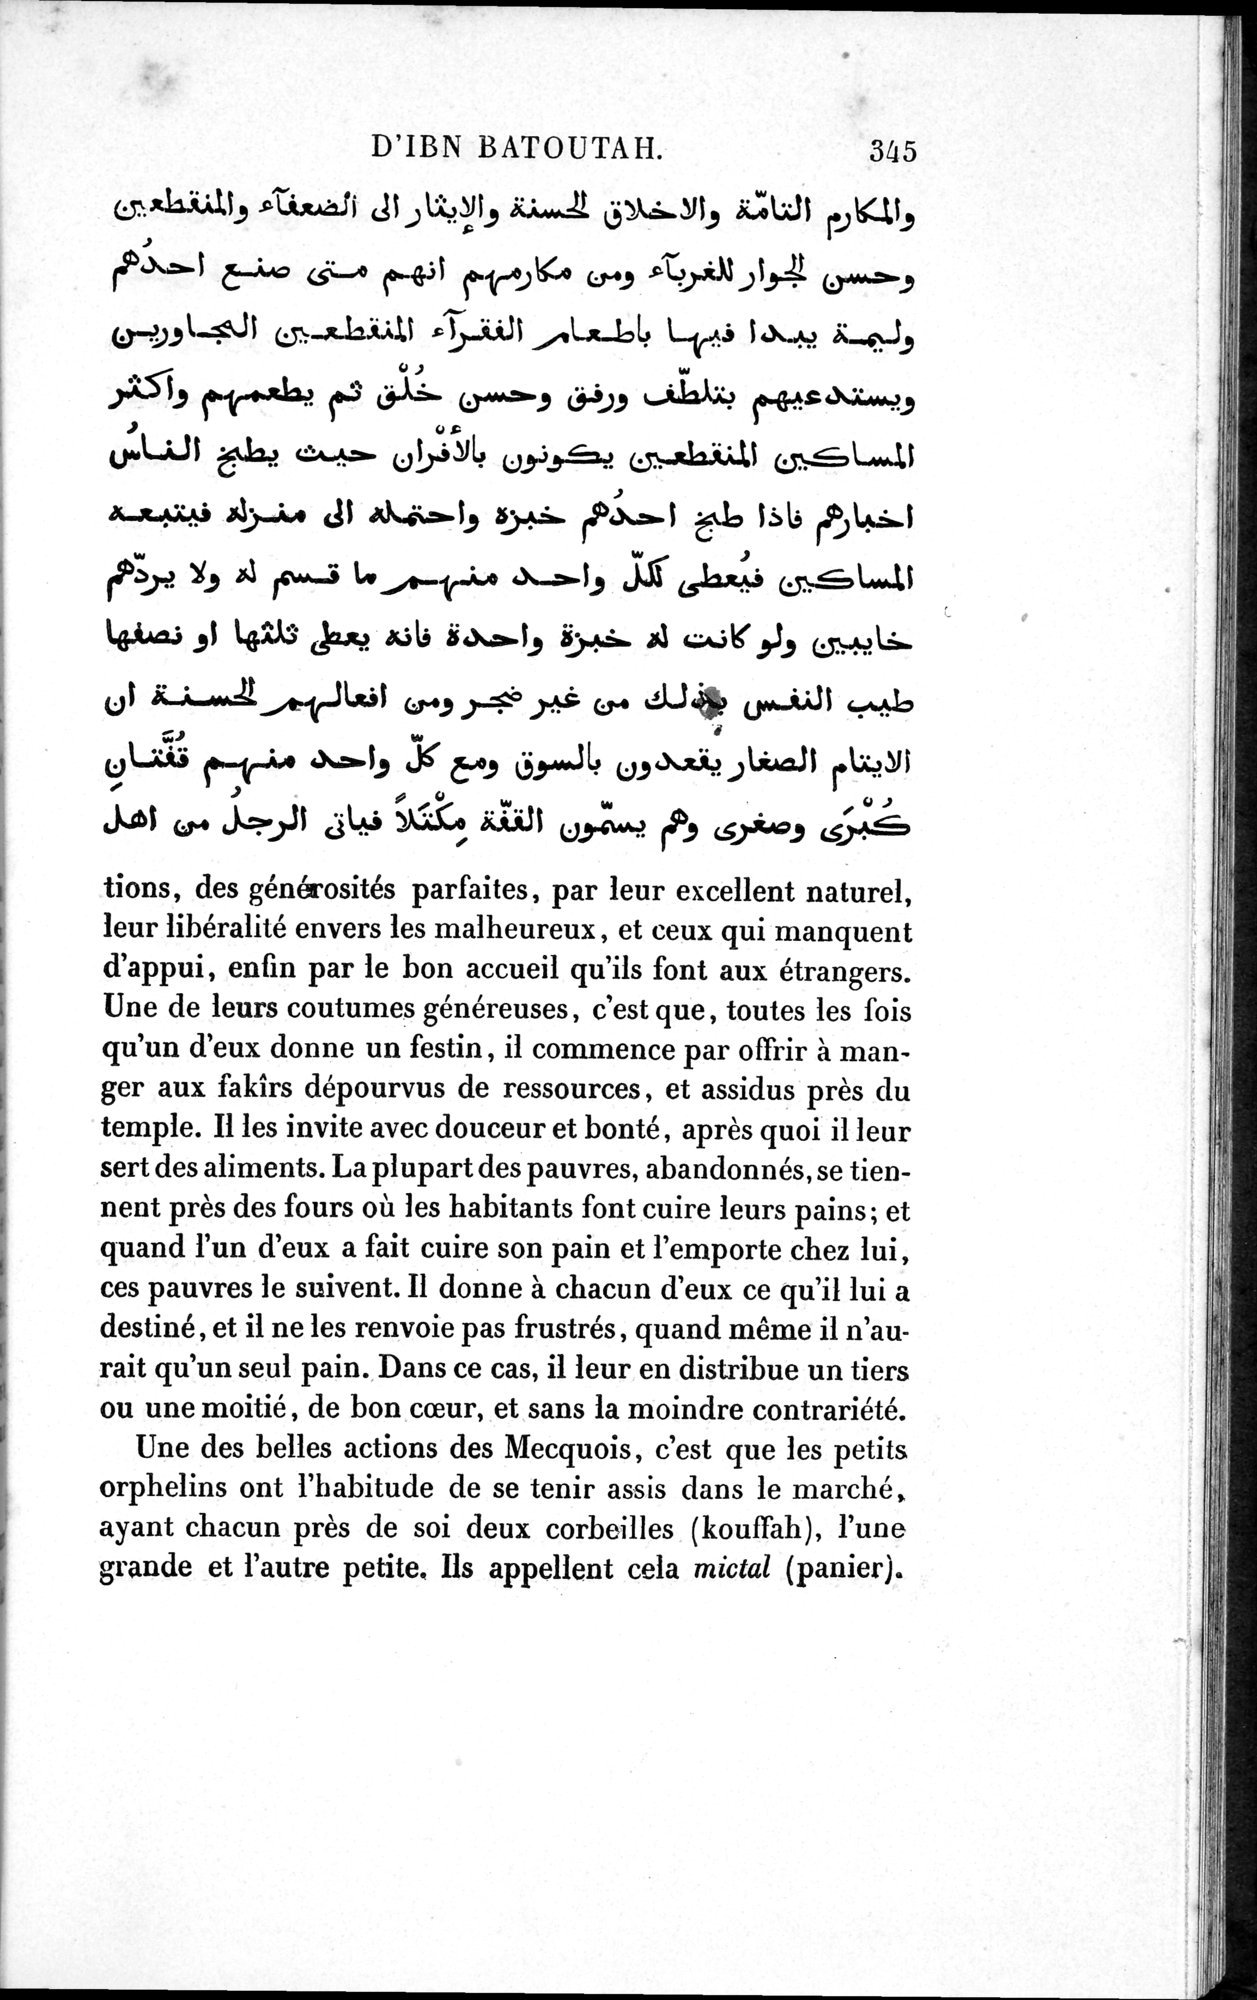 Voyages d'Ibn Batoutah : vol.1 / Page 405 (Grayscale High Resolution Image)